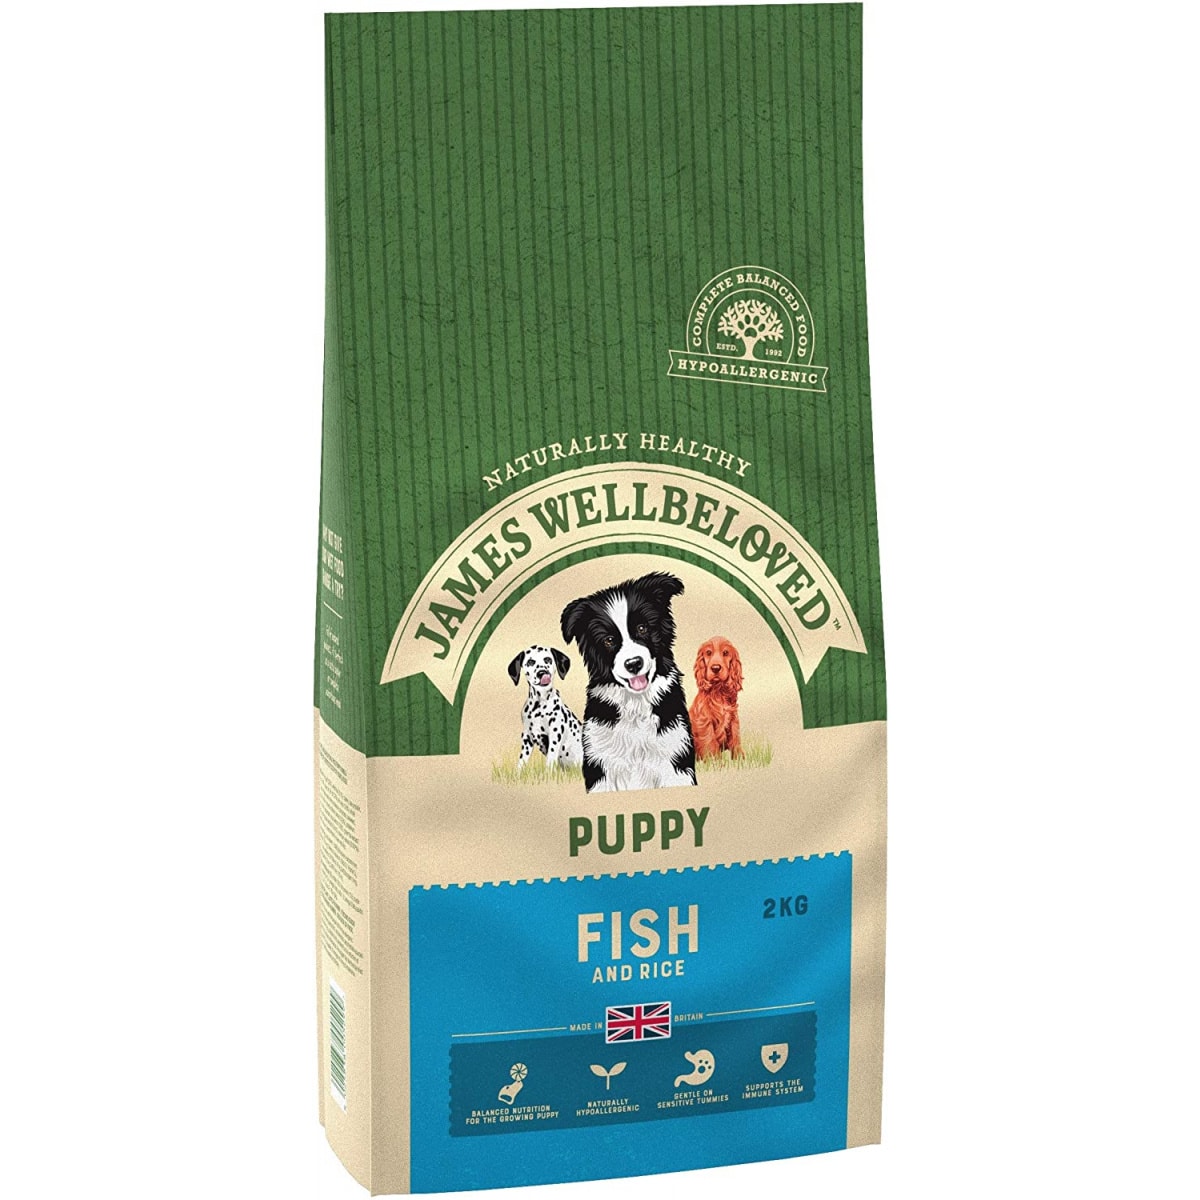 James Wellbeloved – Fish Puppy 2kg – Pawfect Supplies Ltd Product Image